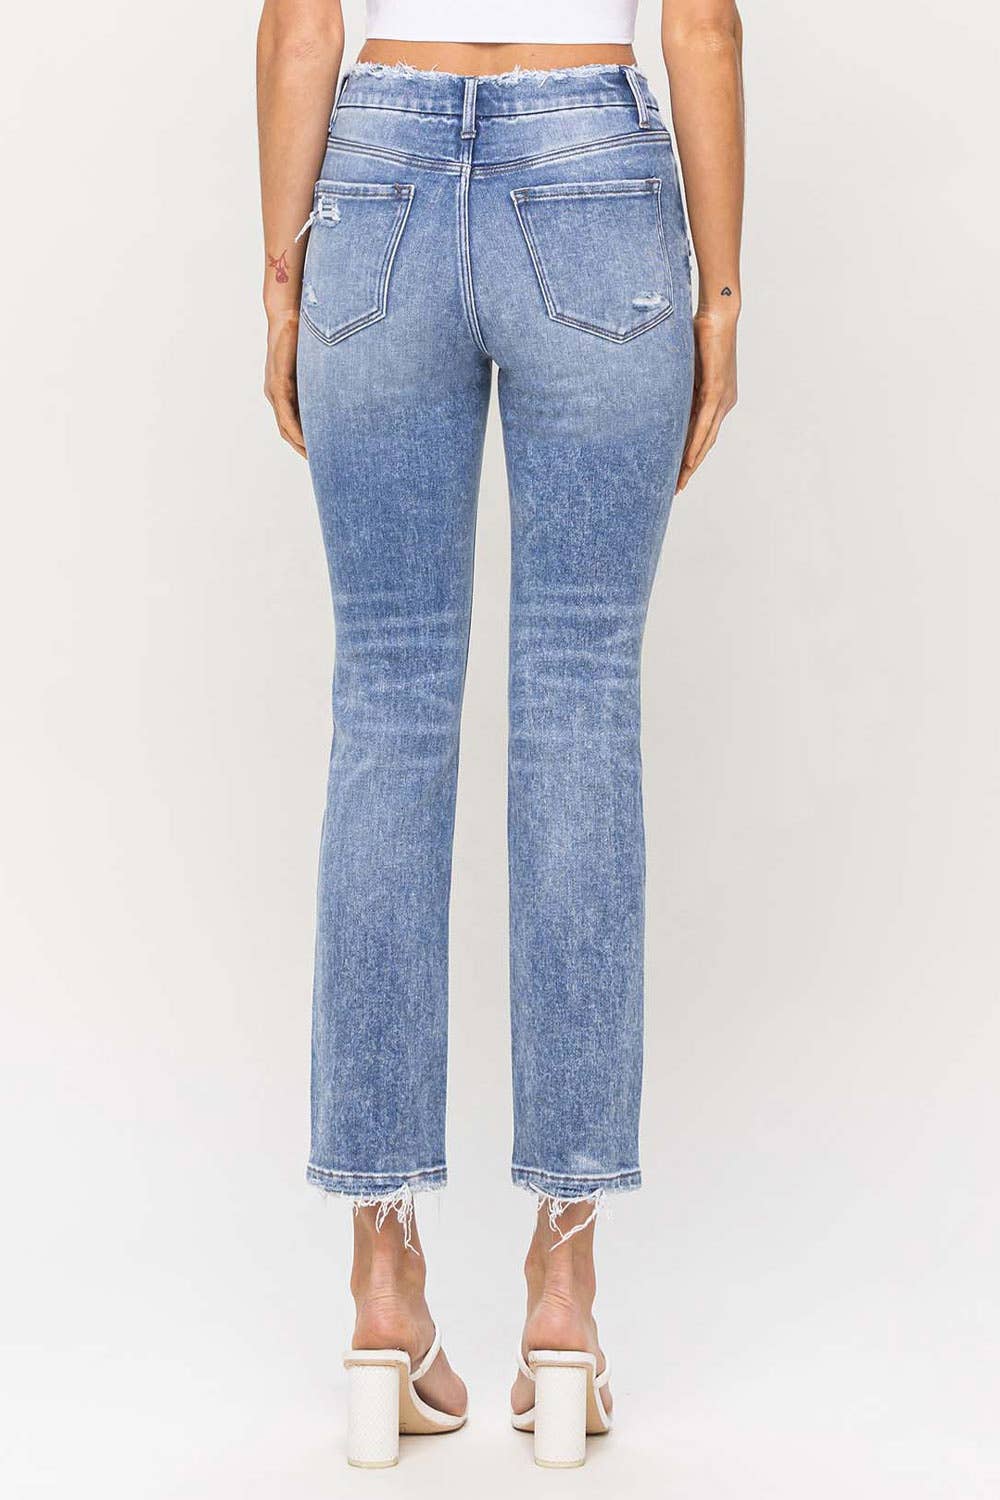 FLYING MONKEY - HIGH RISE CROP SLIM STRAIGHT JEAN F5104: CONVENIENTLY / 28